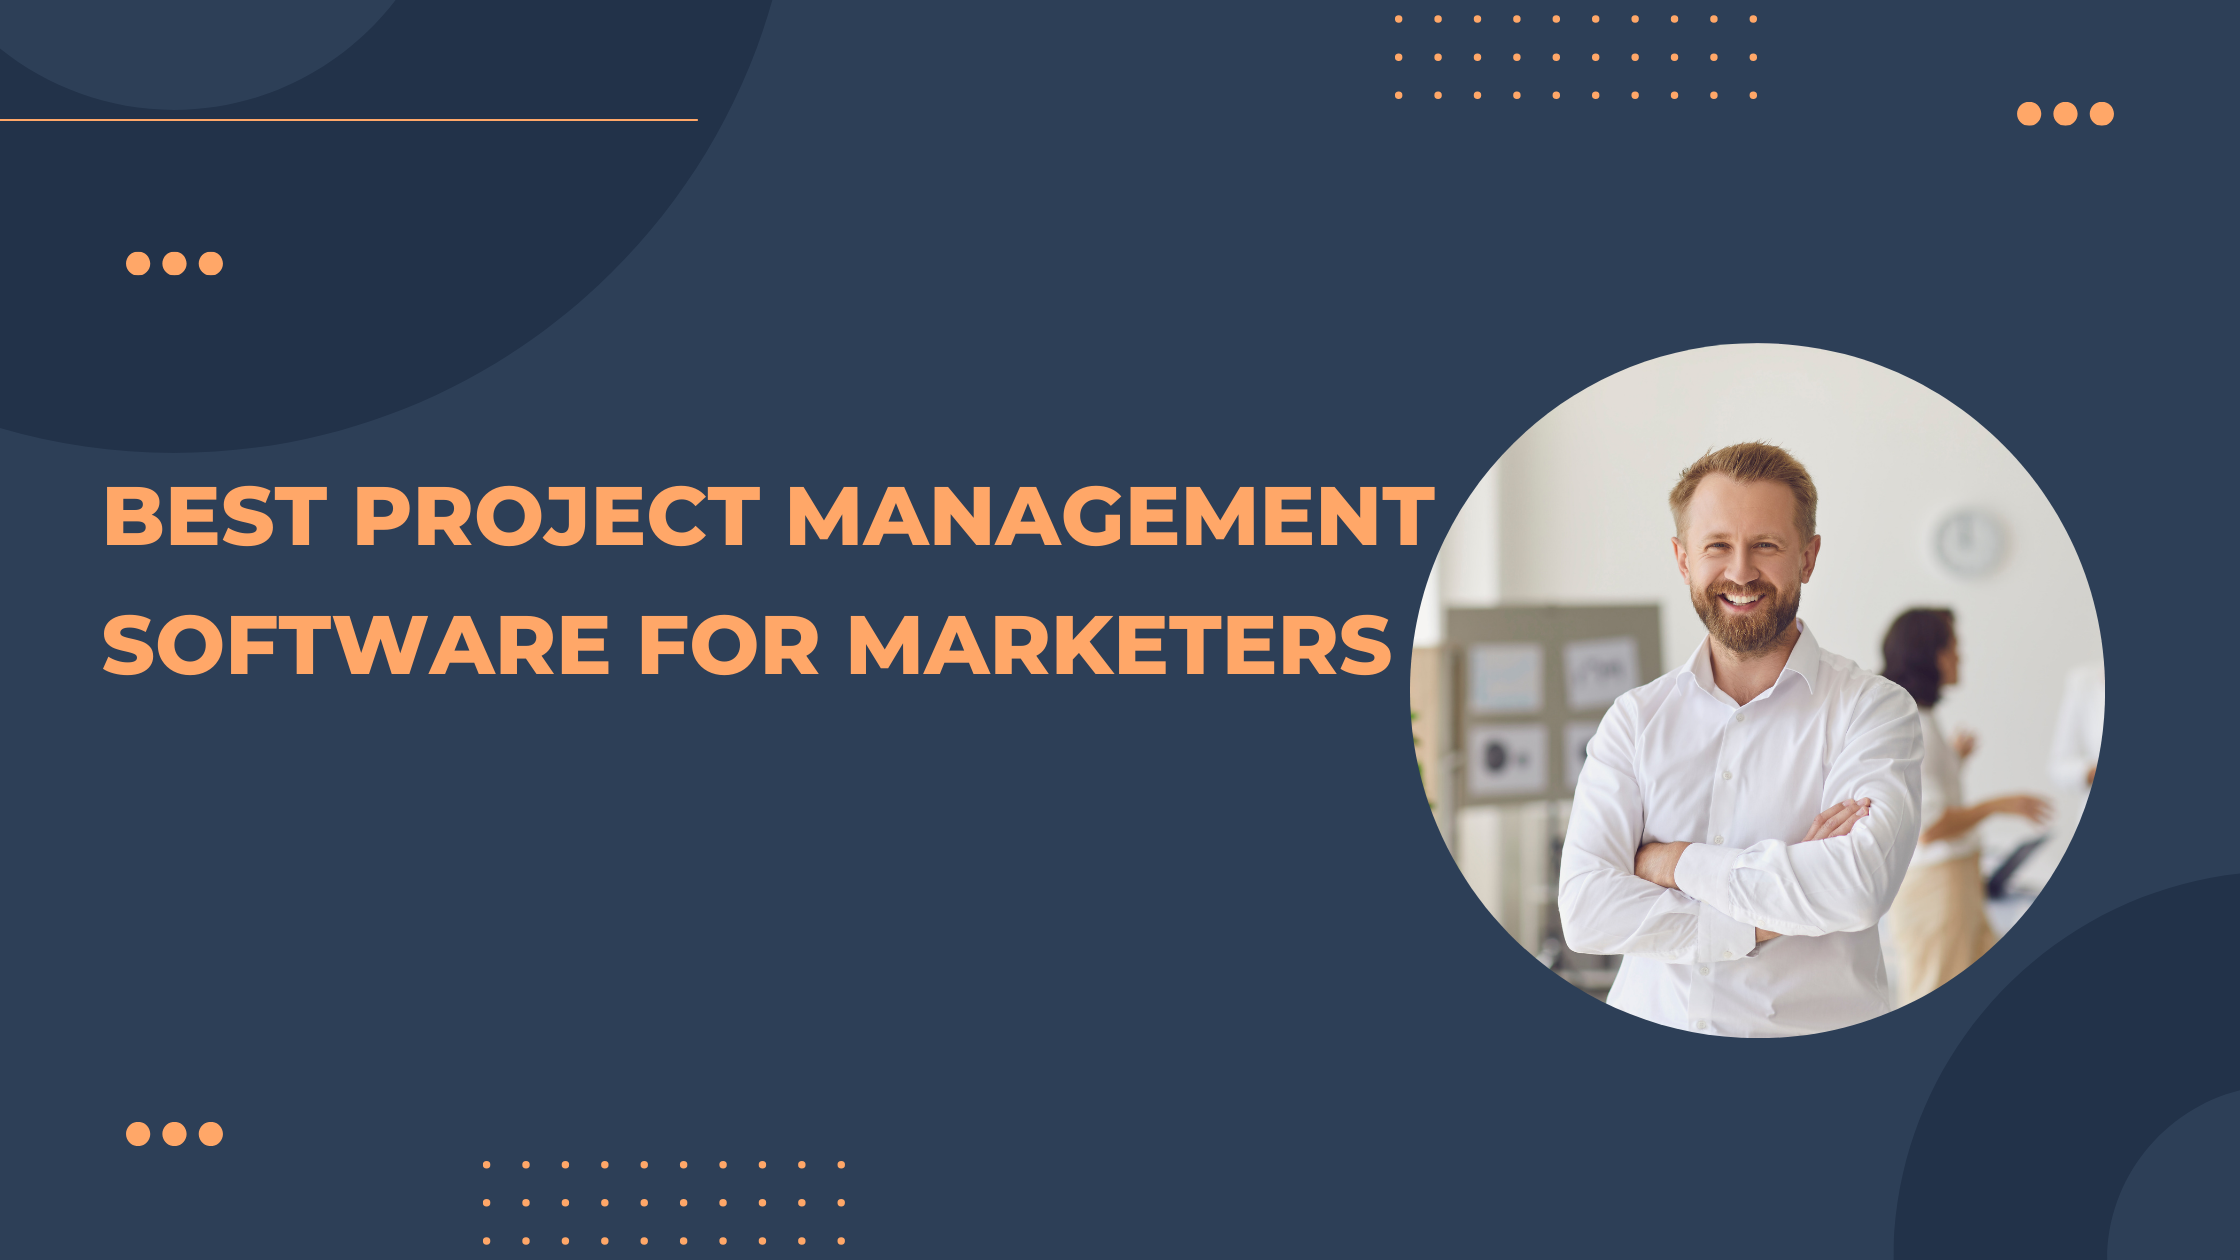 Best Project Management Software for Marketers